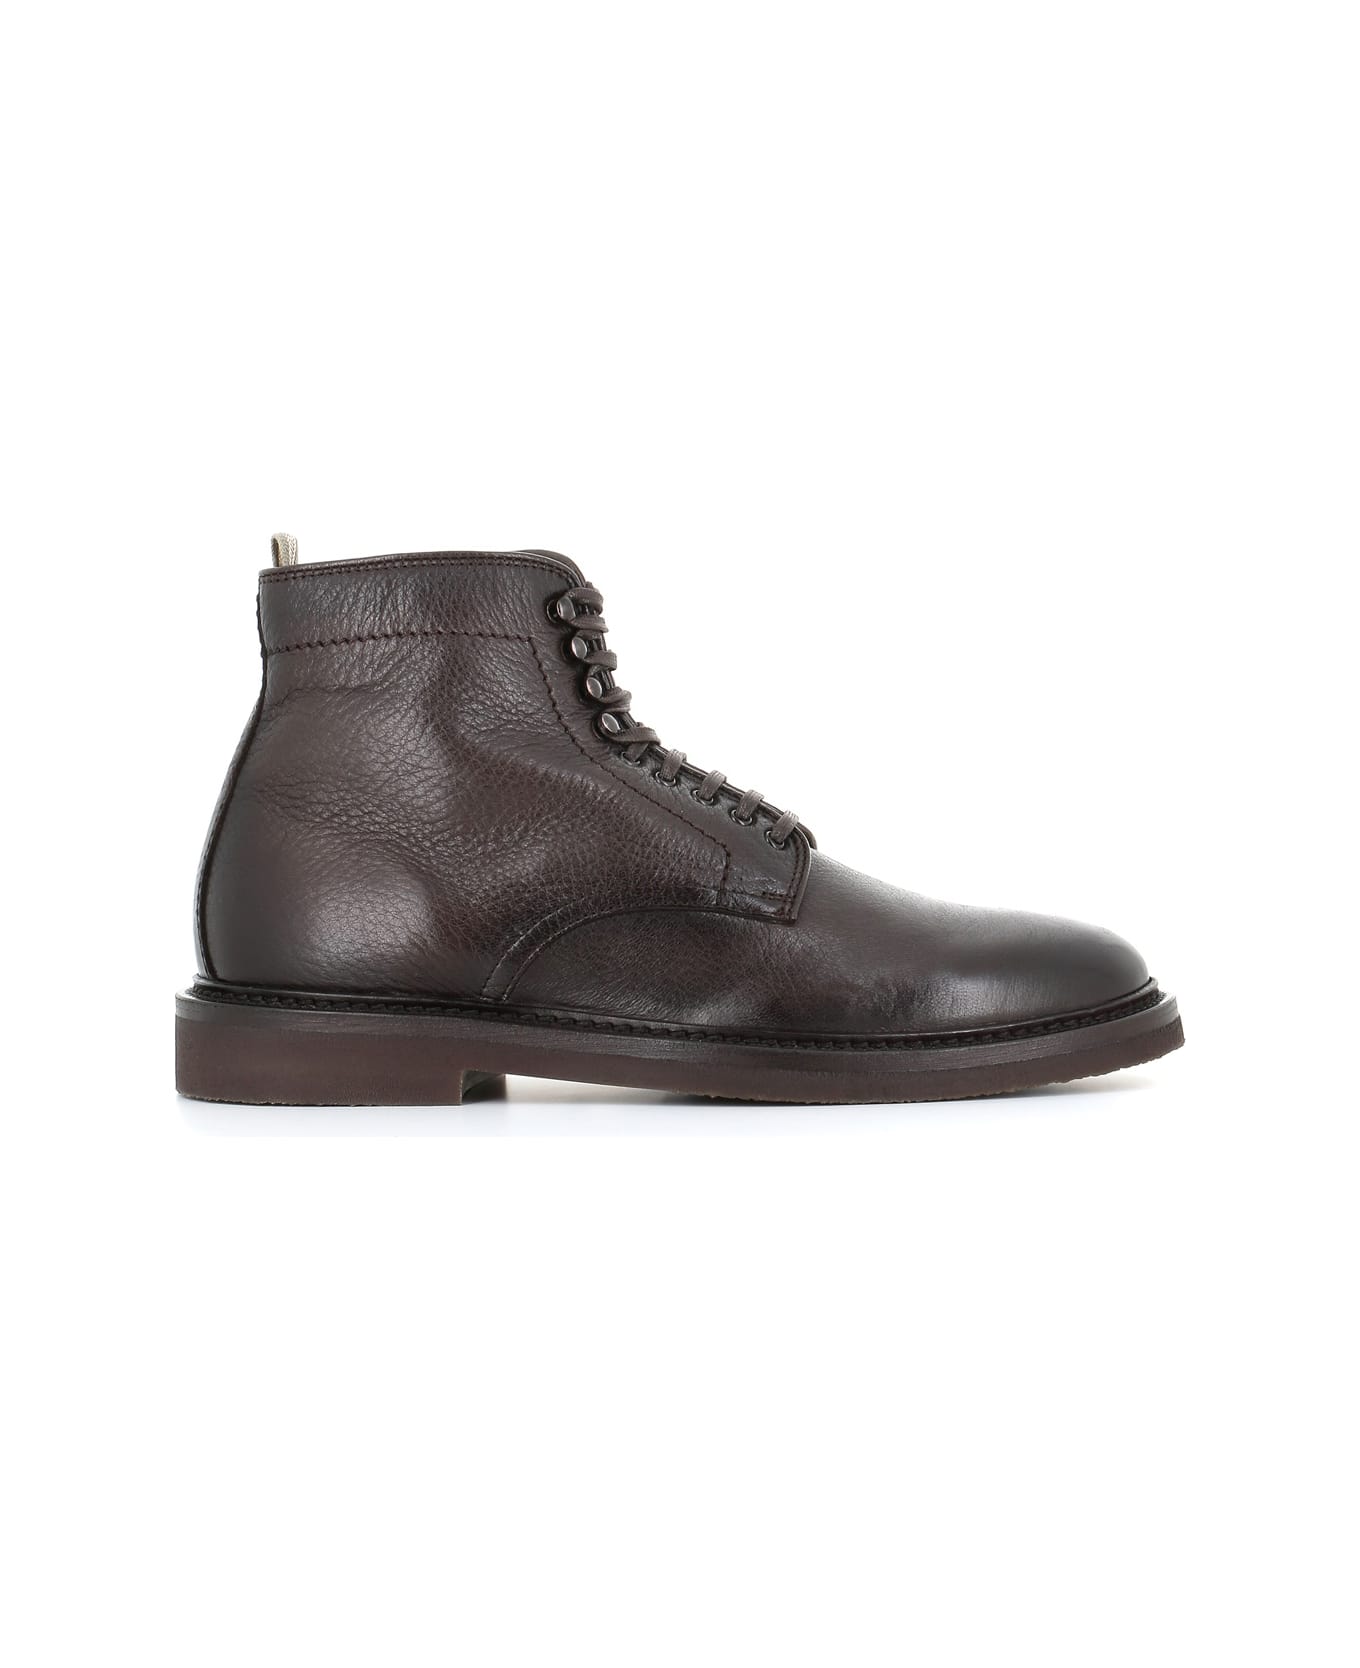 Officine Creative Lace Up Boot Hopkins Flexi/203 - Brown ブーツ